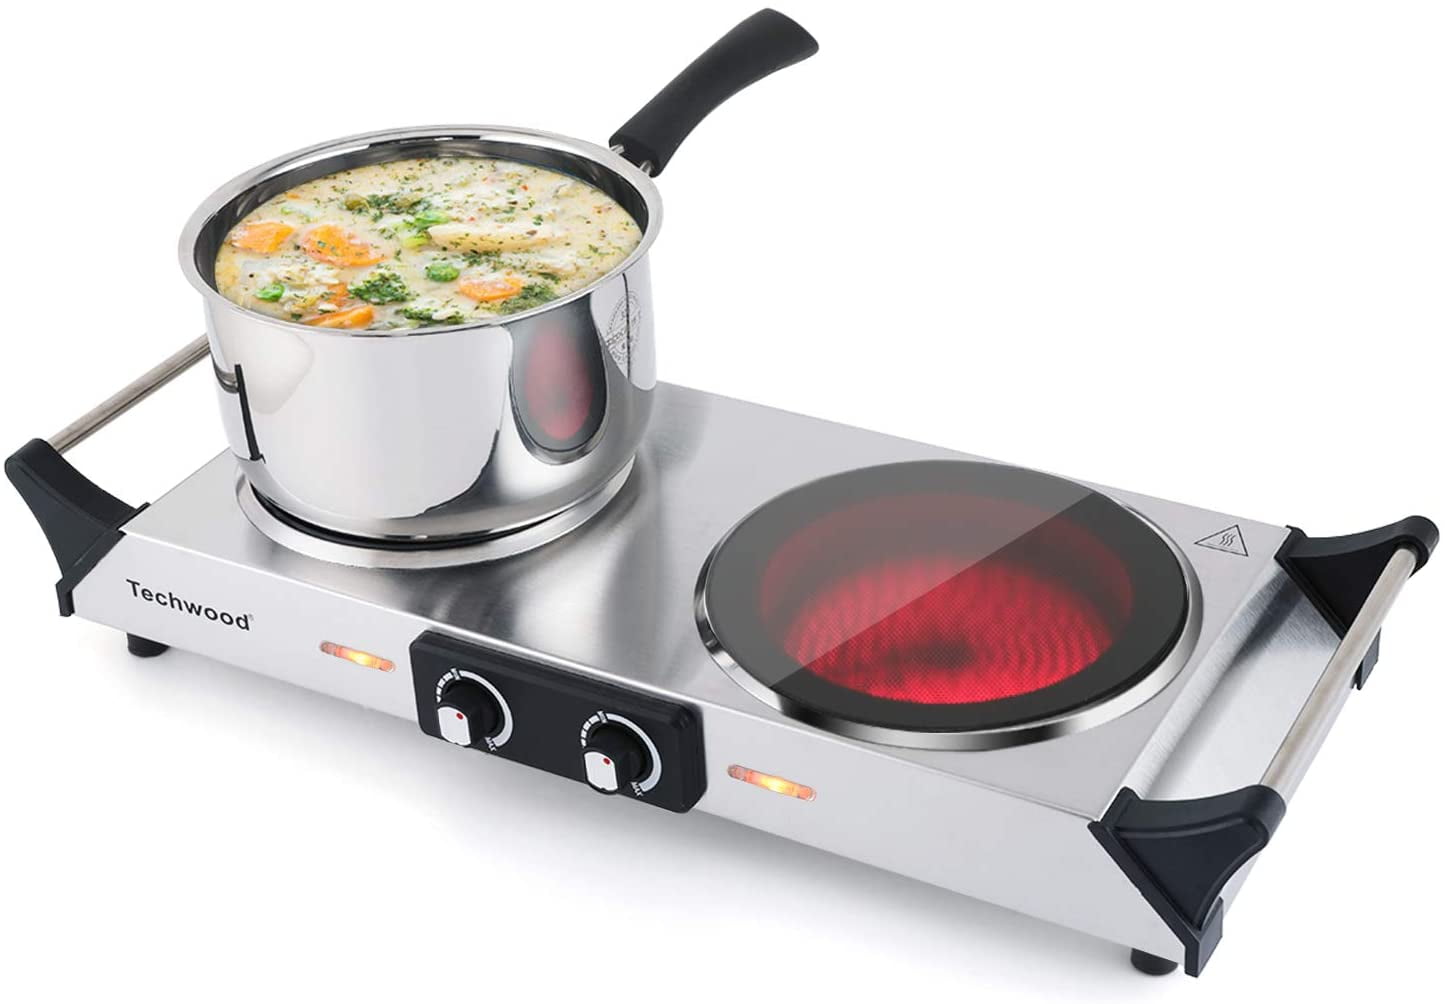 techwood-hot-plate-portable-electric-stove-1500w-countertop-single